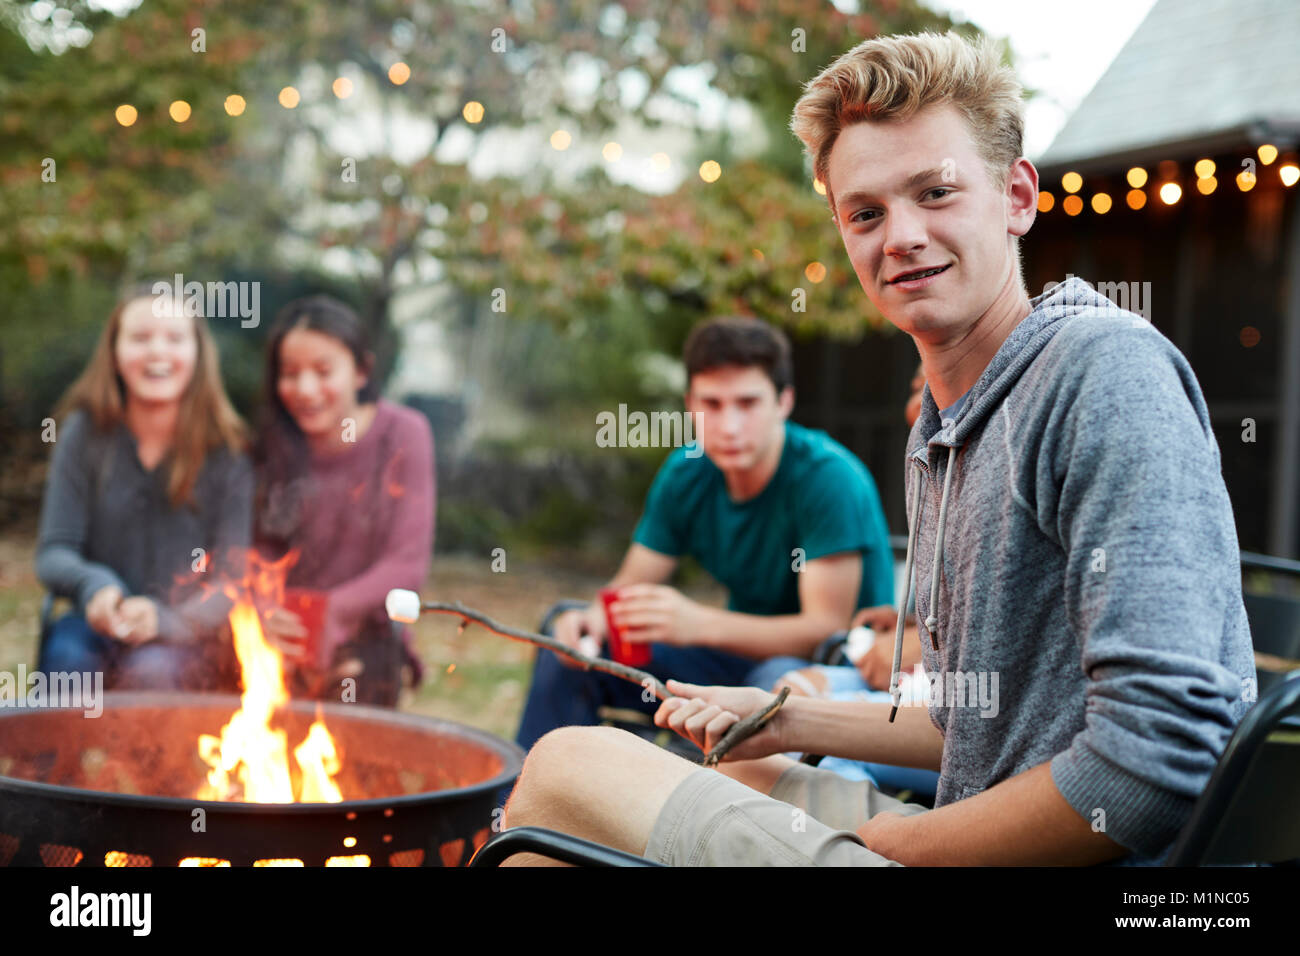 Teenage boy with friends toasting guimauve un foyer Banque D'Images